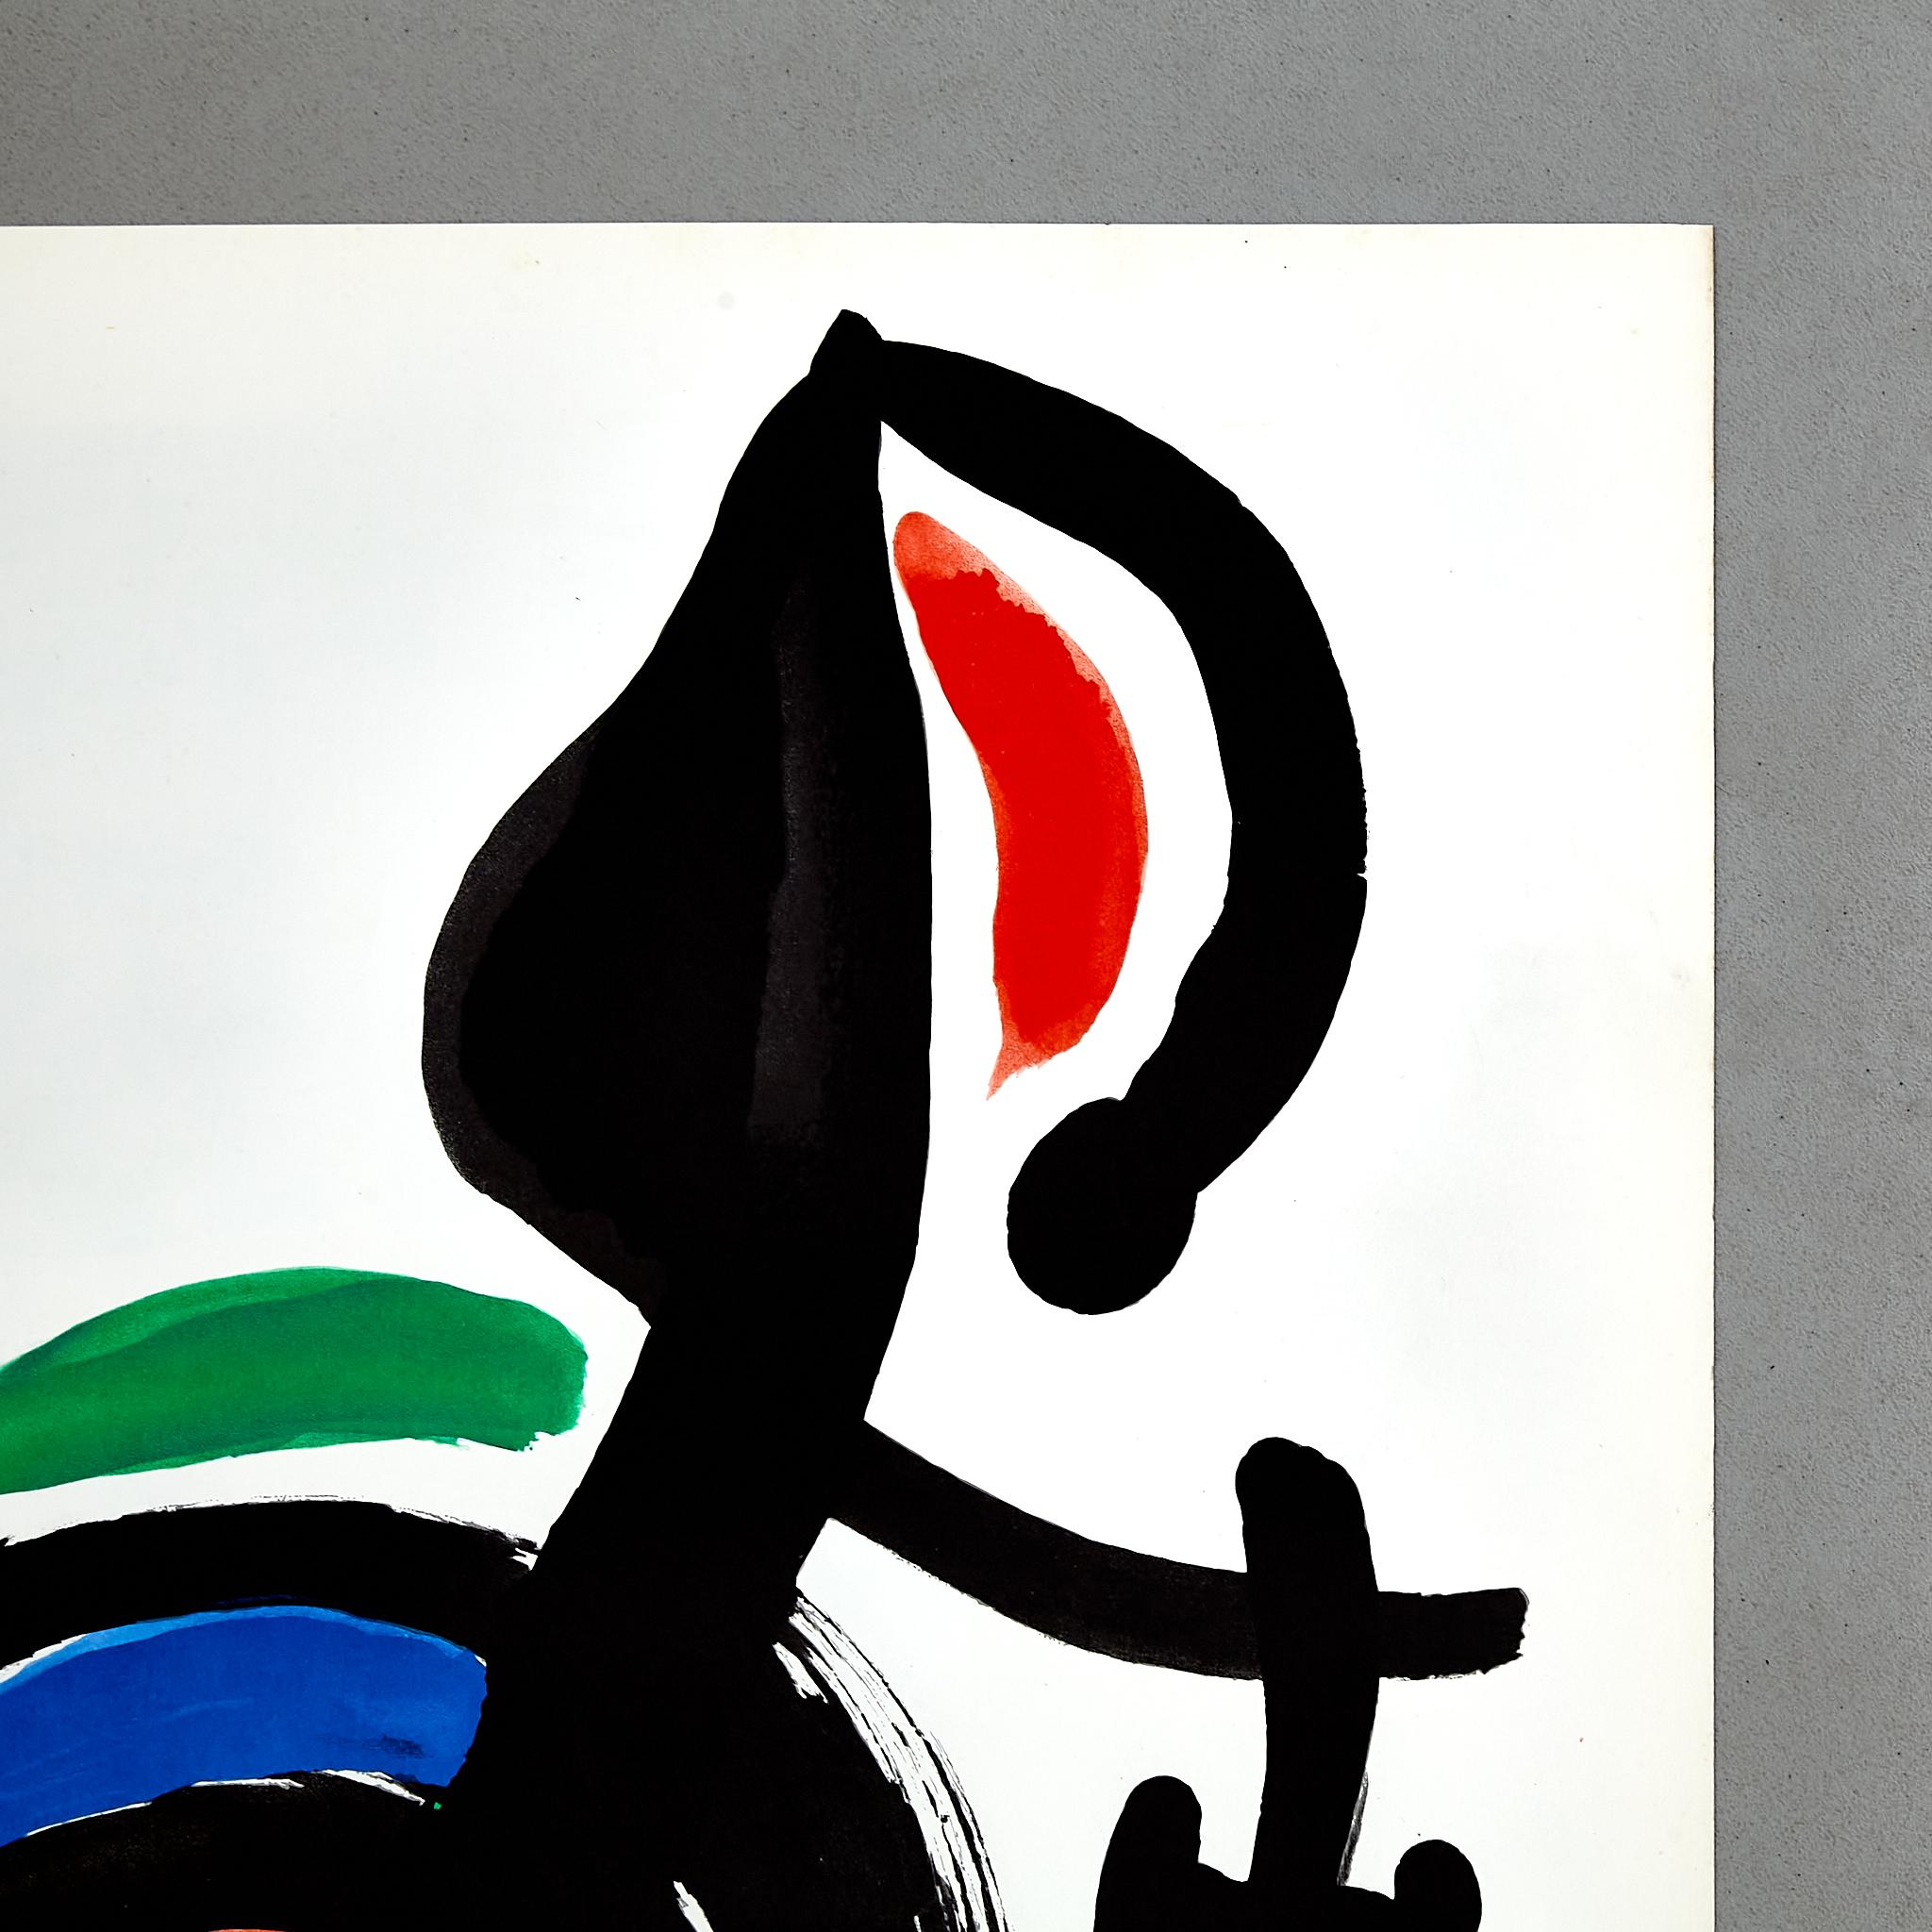 Spanish  High Quality Fine Art Color Lithography by Joan Miró, circa 1960.